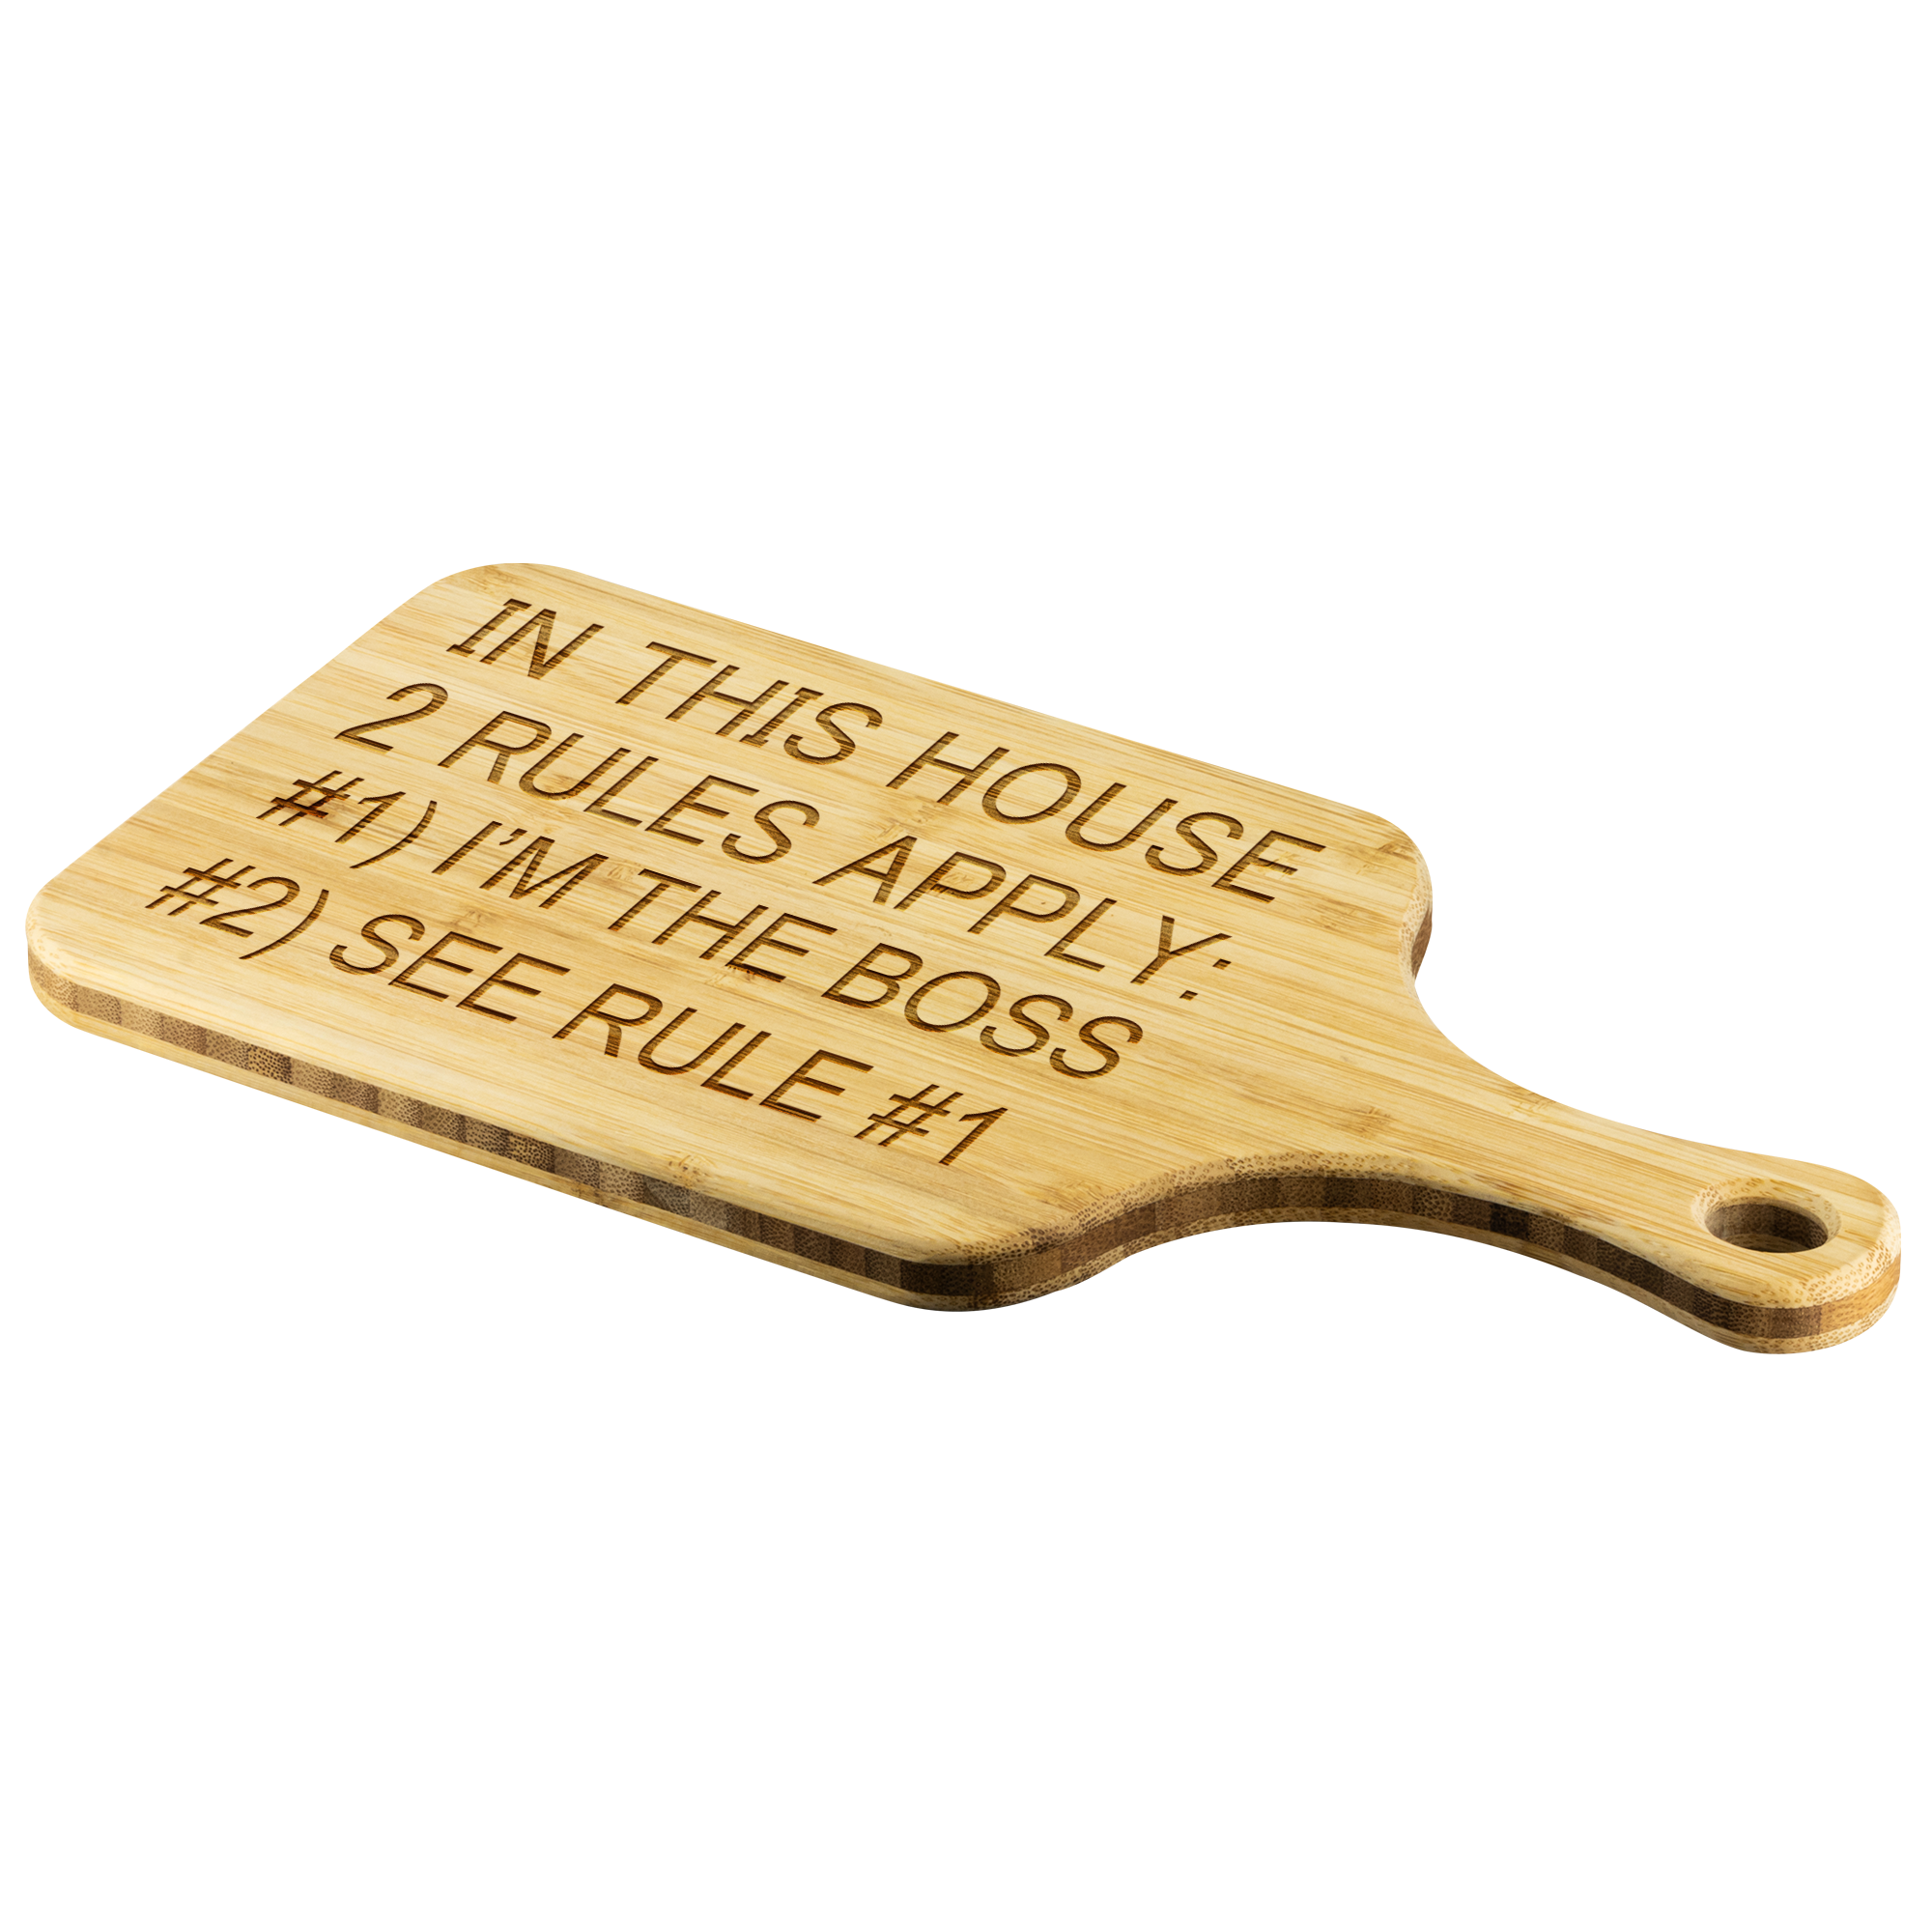 In This House 2 Rules Apply Funny Wood Cutting Board | Sarcastic Me